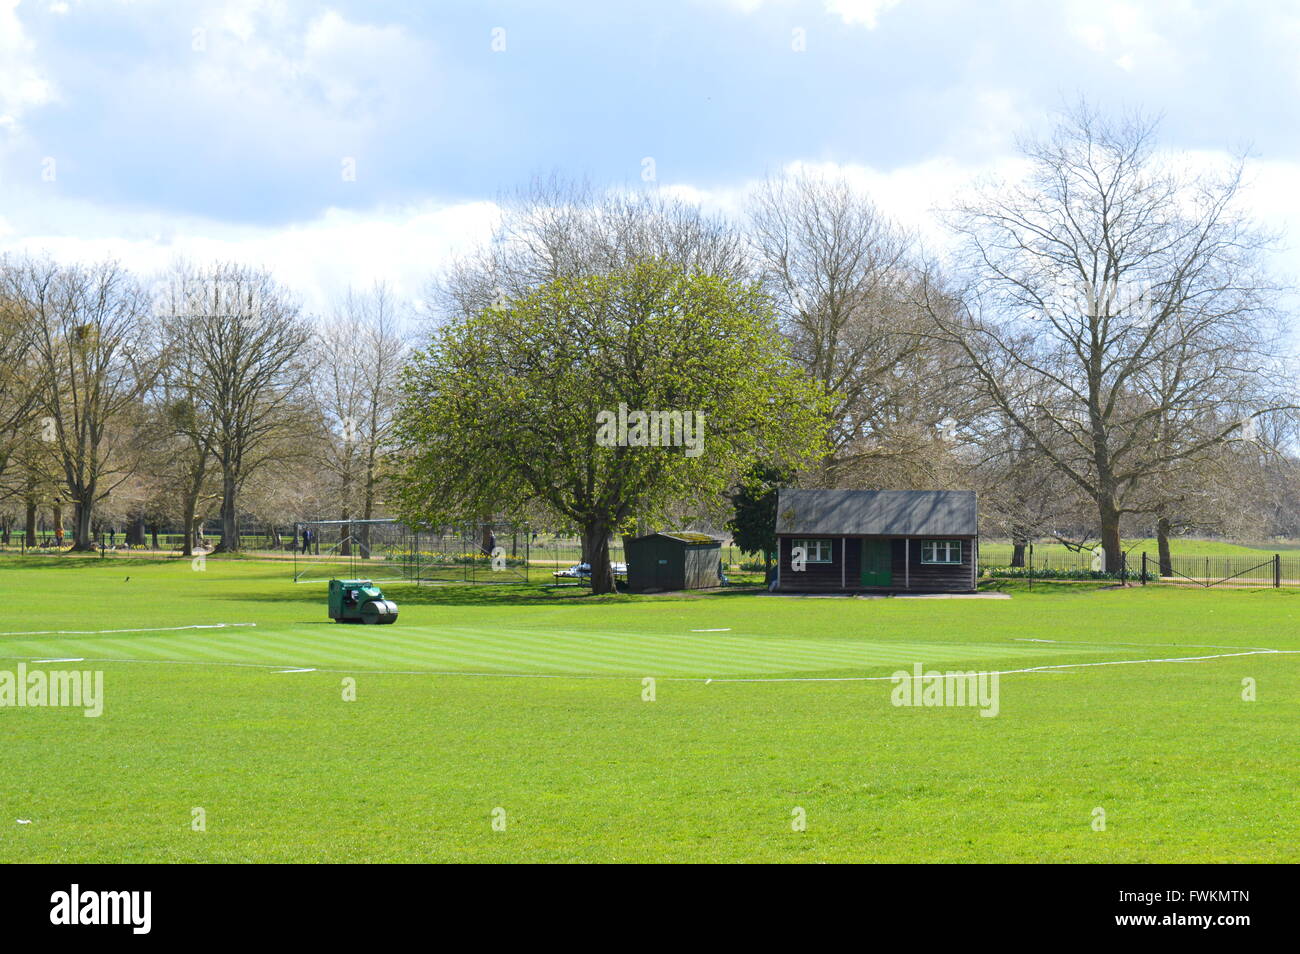 A cricket pitch in Oxford University prepared and ready for the cricket season.  a small traditional pavillion. Stock Photo